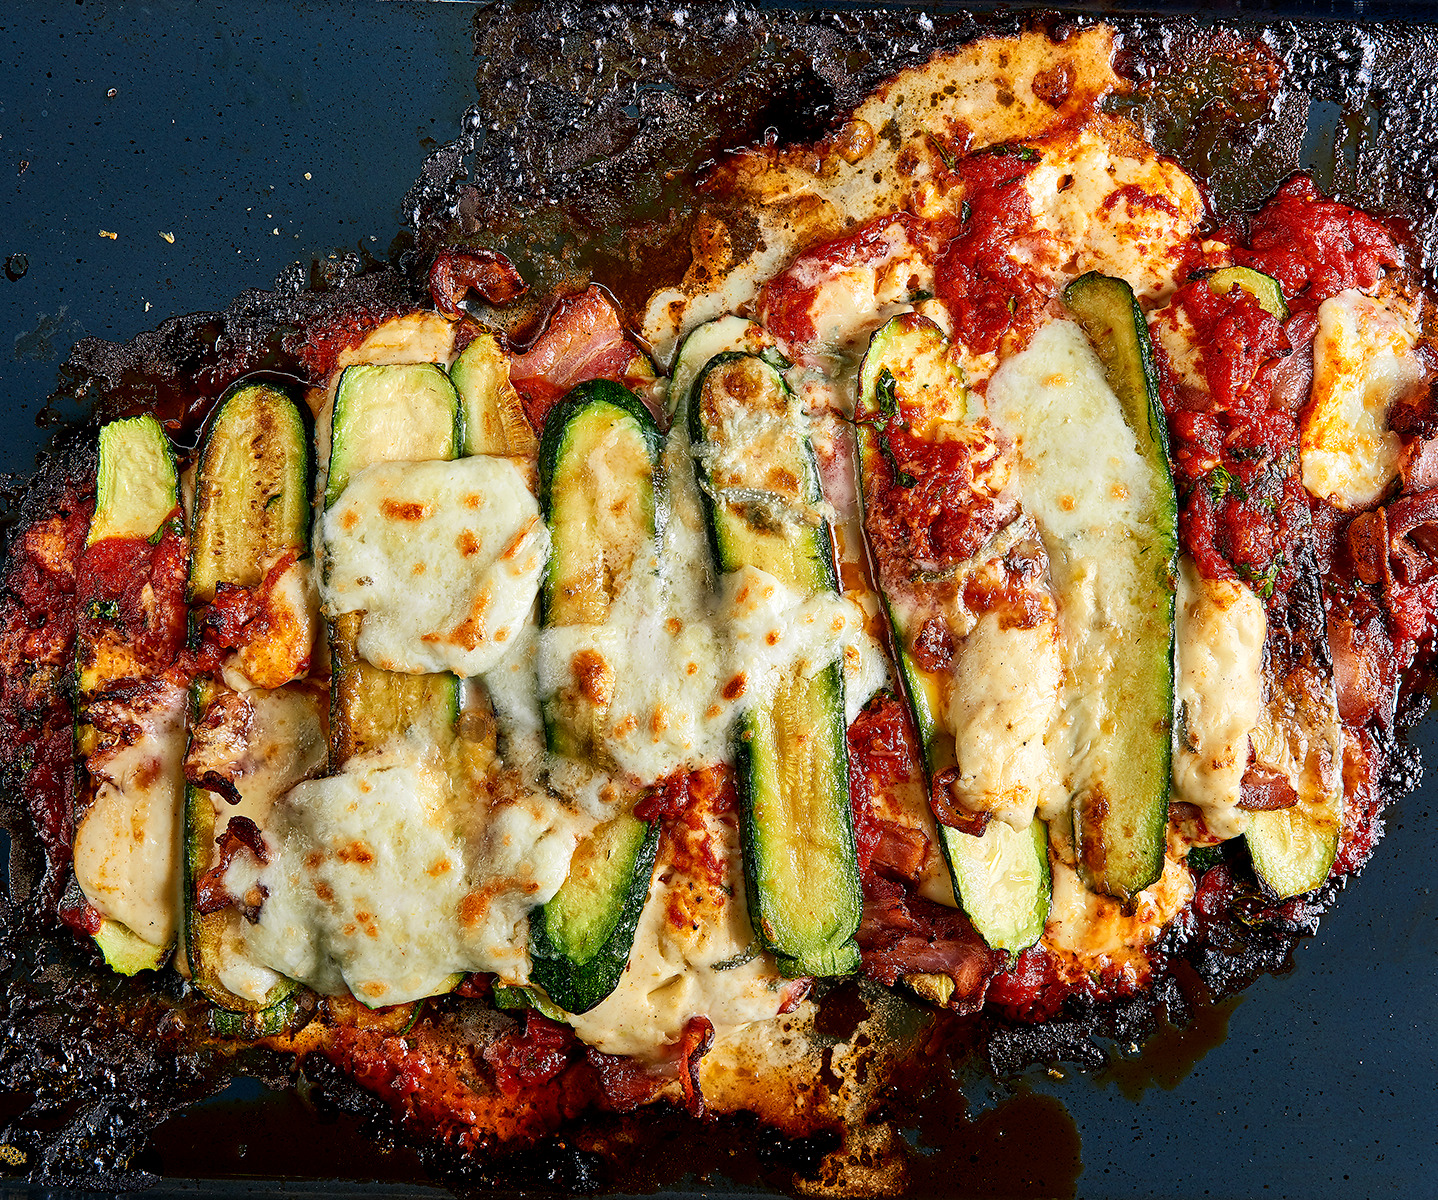 The 20 Minute Three Cheese Baby Marrow Lasagne That You Want To Make For Dinner